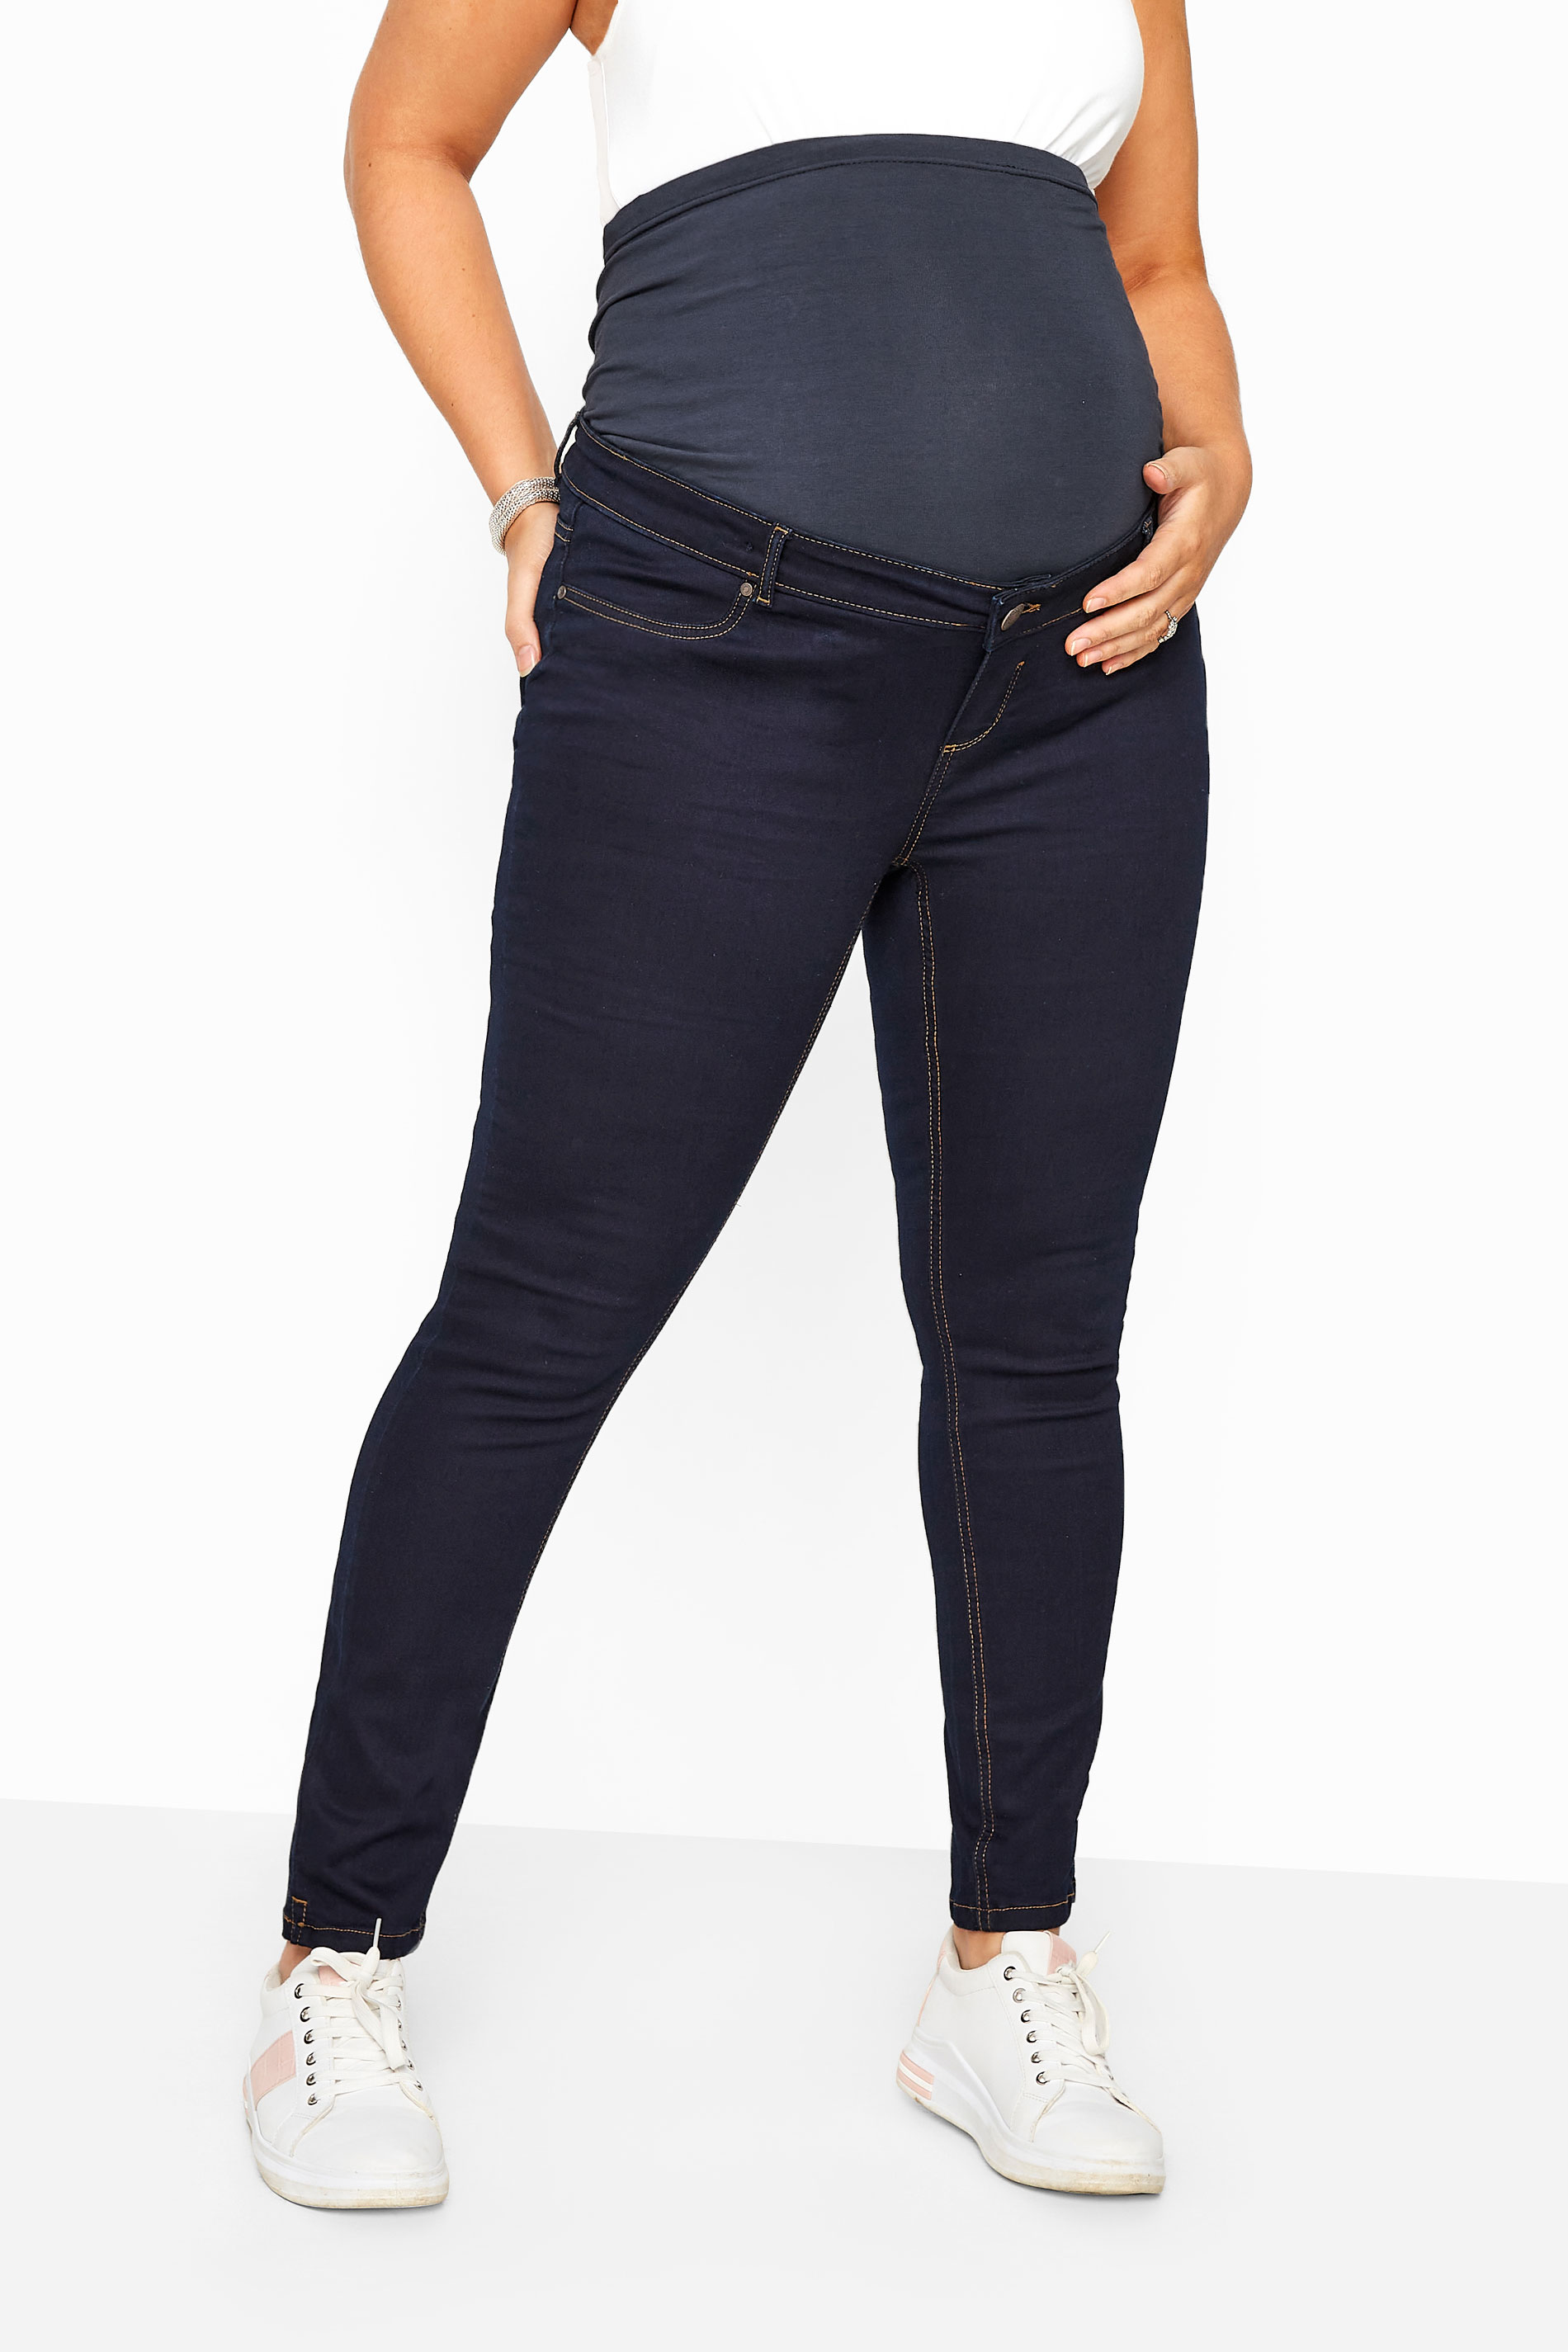 BUMP IT UP MATERNITY Curve Indigo Blue Skinny Jeans With Comfort Panel 1